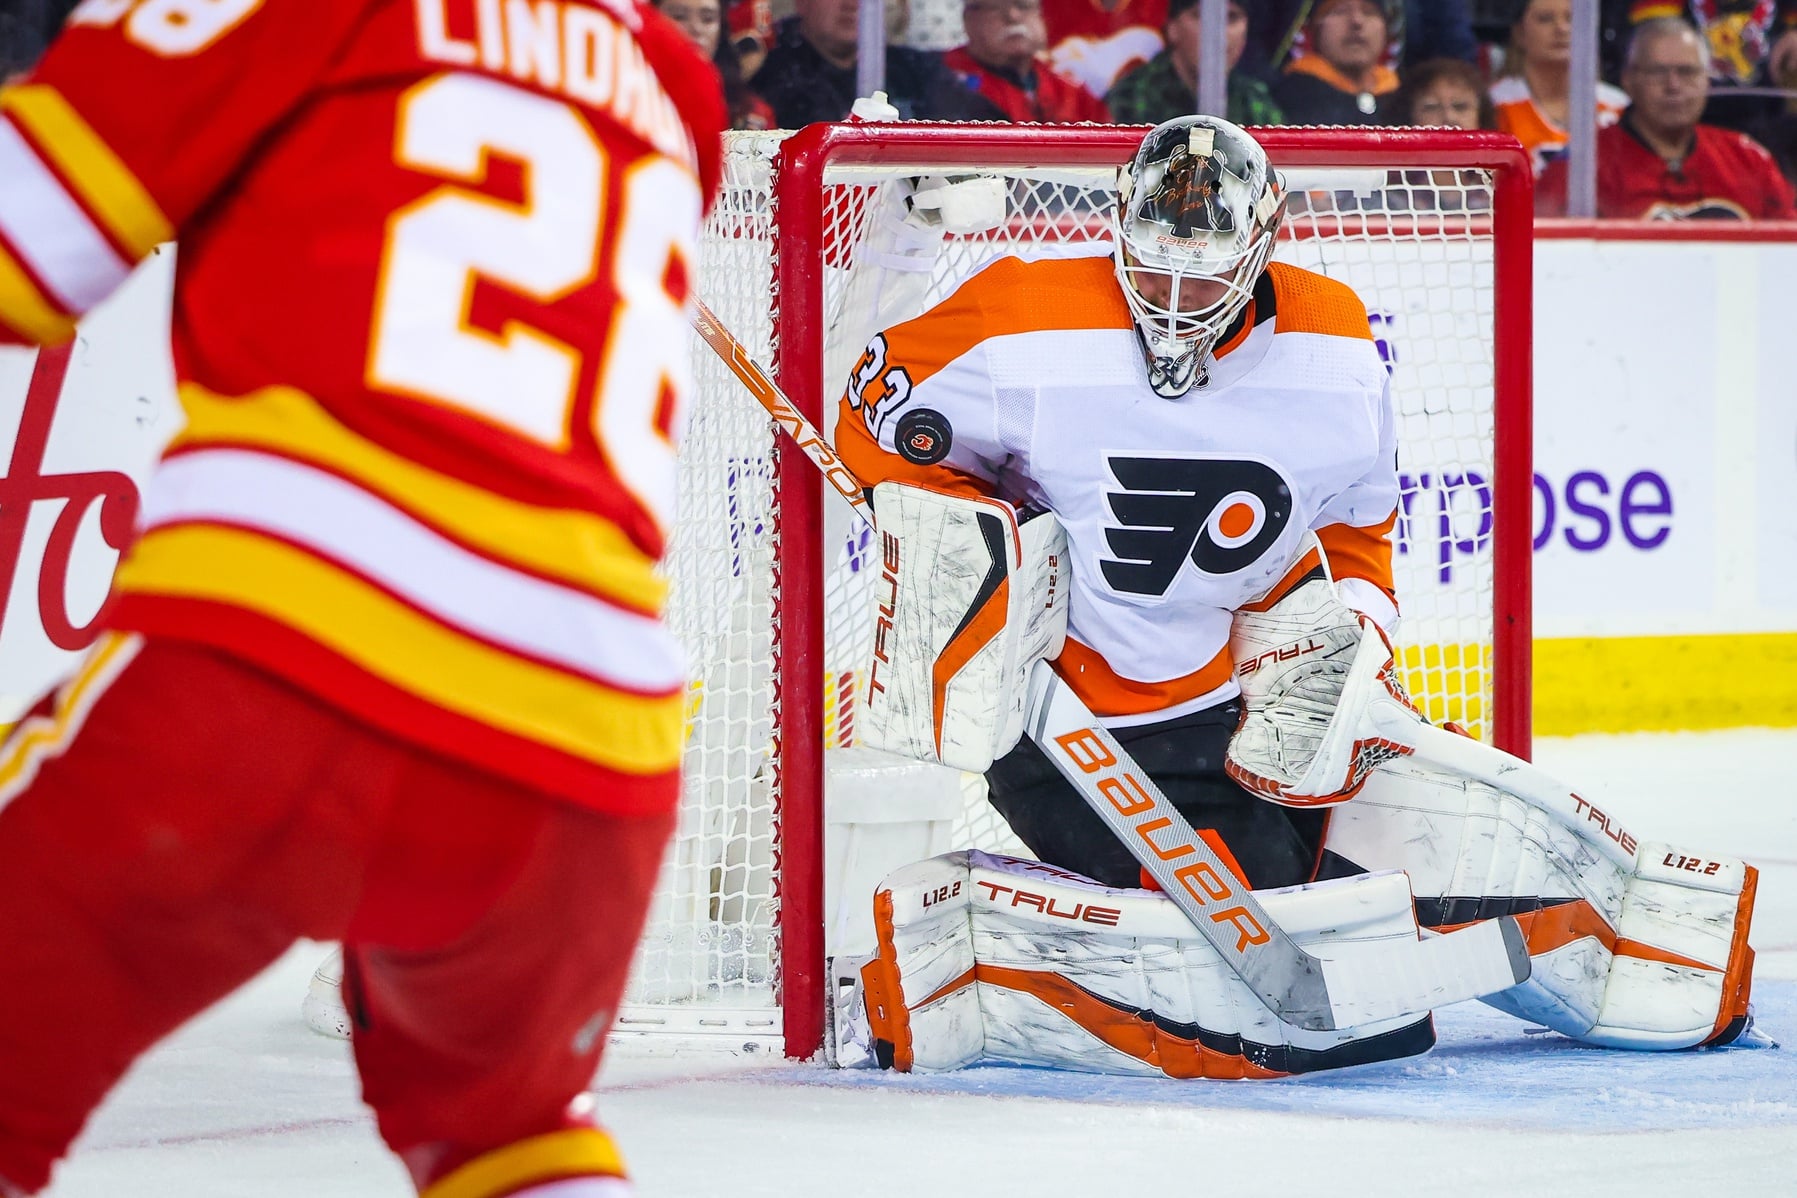 No Goalie Controversy, but the Flyers’ Current Situation is a Good Problem to Have